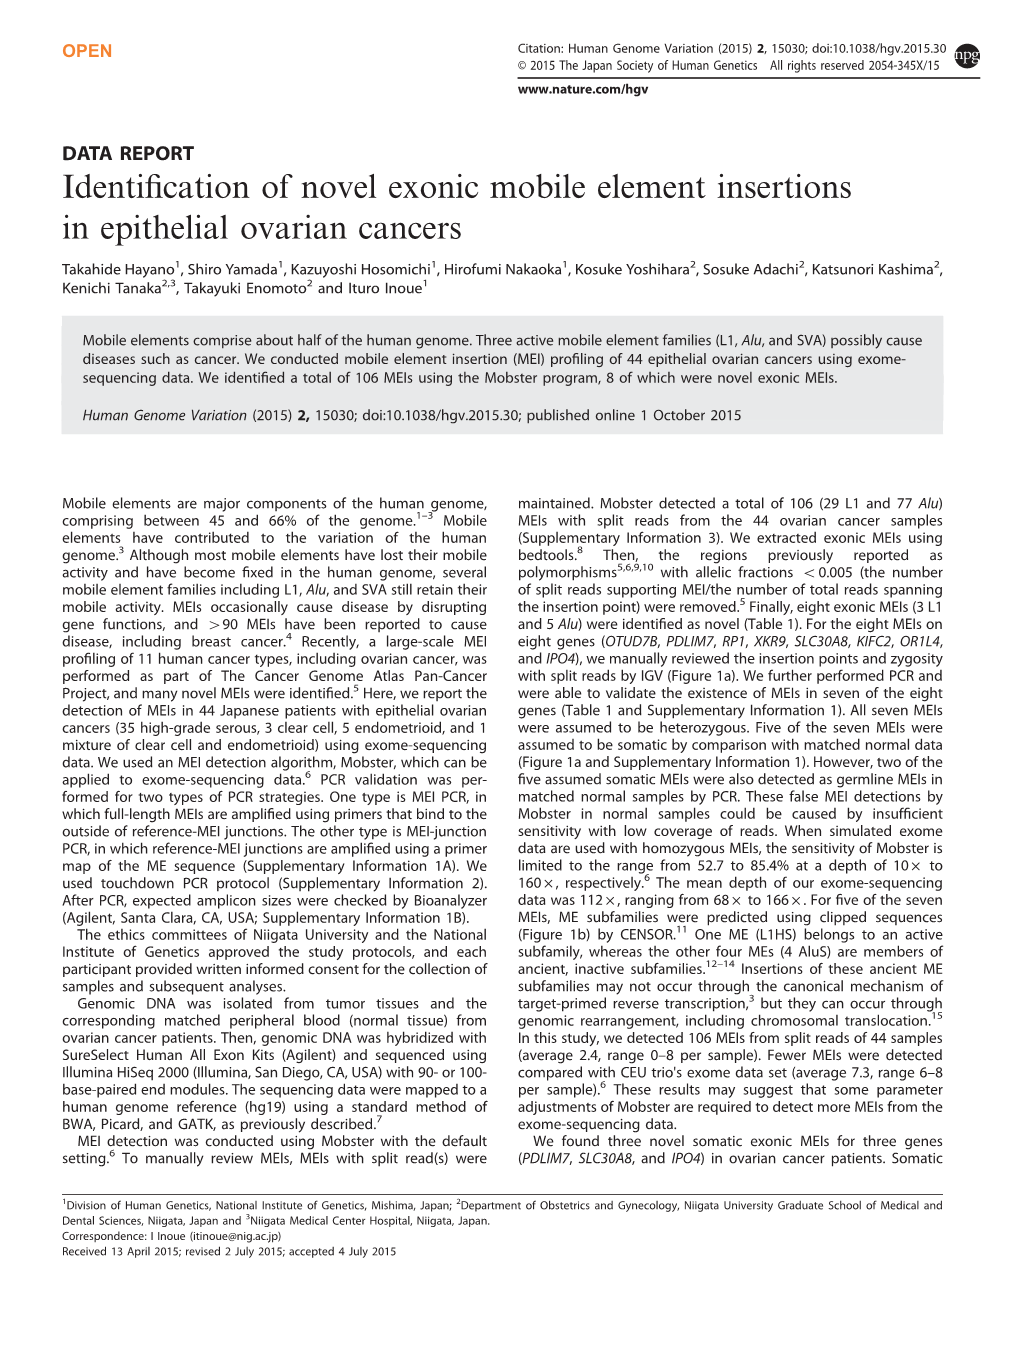 Identification of Novel Exonic Mobile Element Insertions in Epithelial Ovarian Cancers